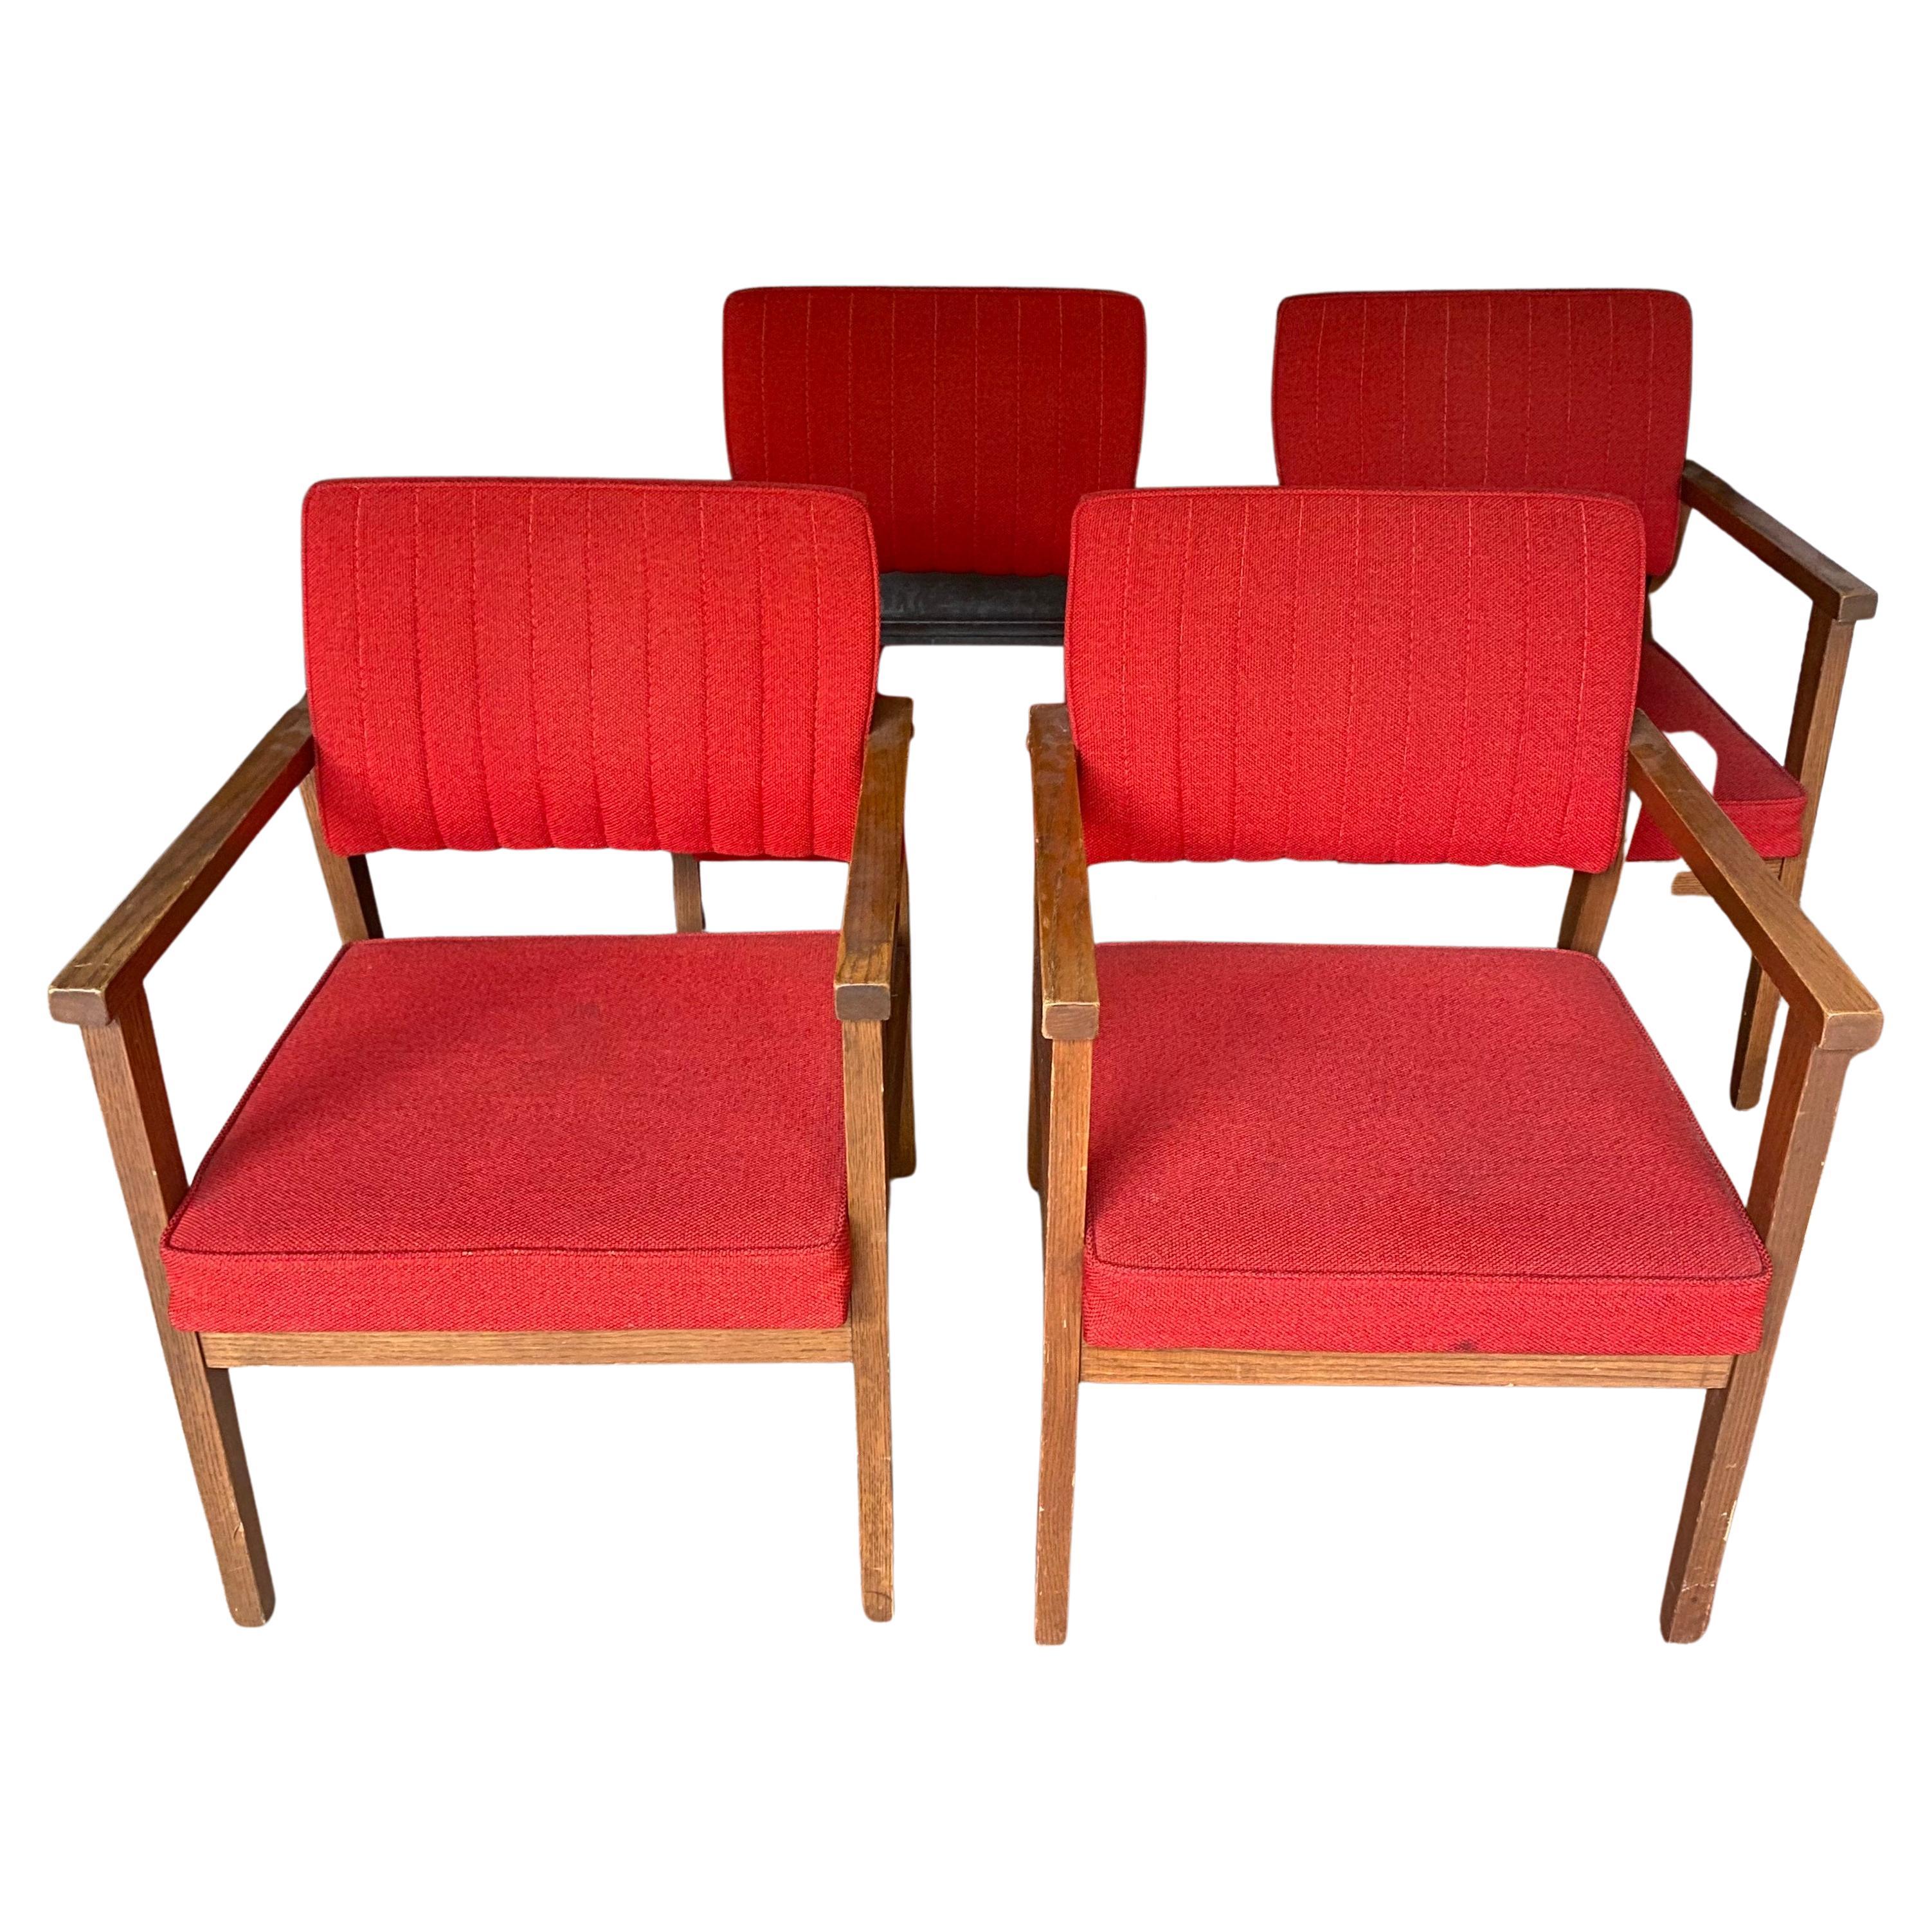 Suite of 4 Red Armchairs Rosewood / Red Jersey Canadian Atlas Furniture